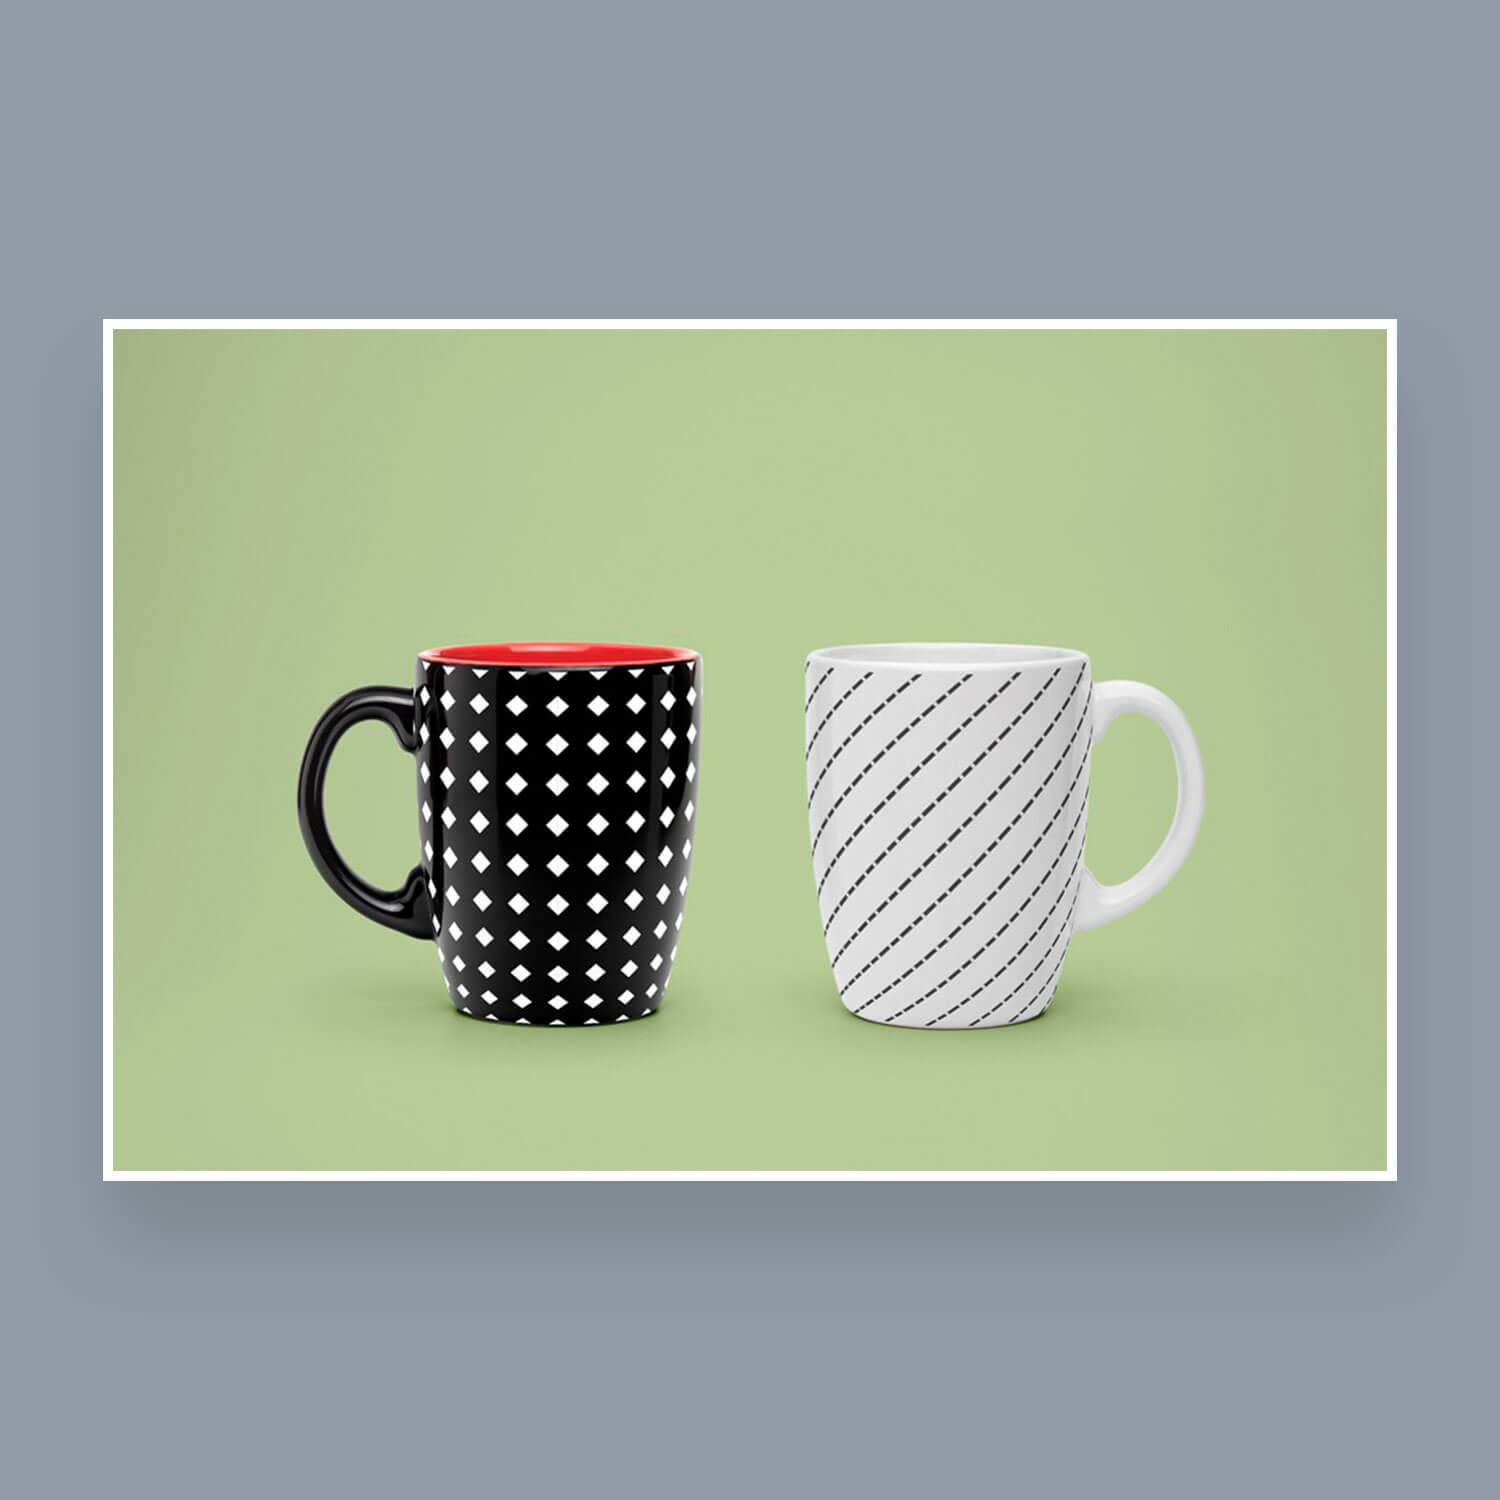 Two cups with seamless geometric patterns in black and white on a green background.